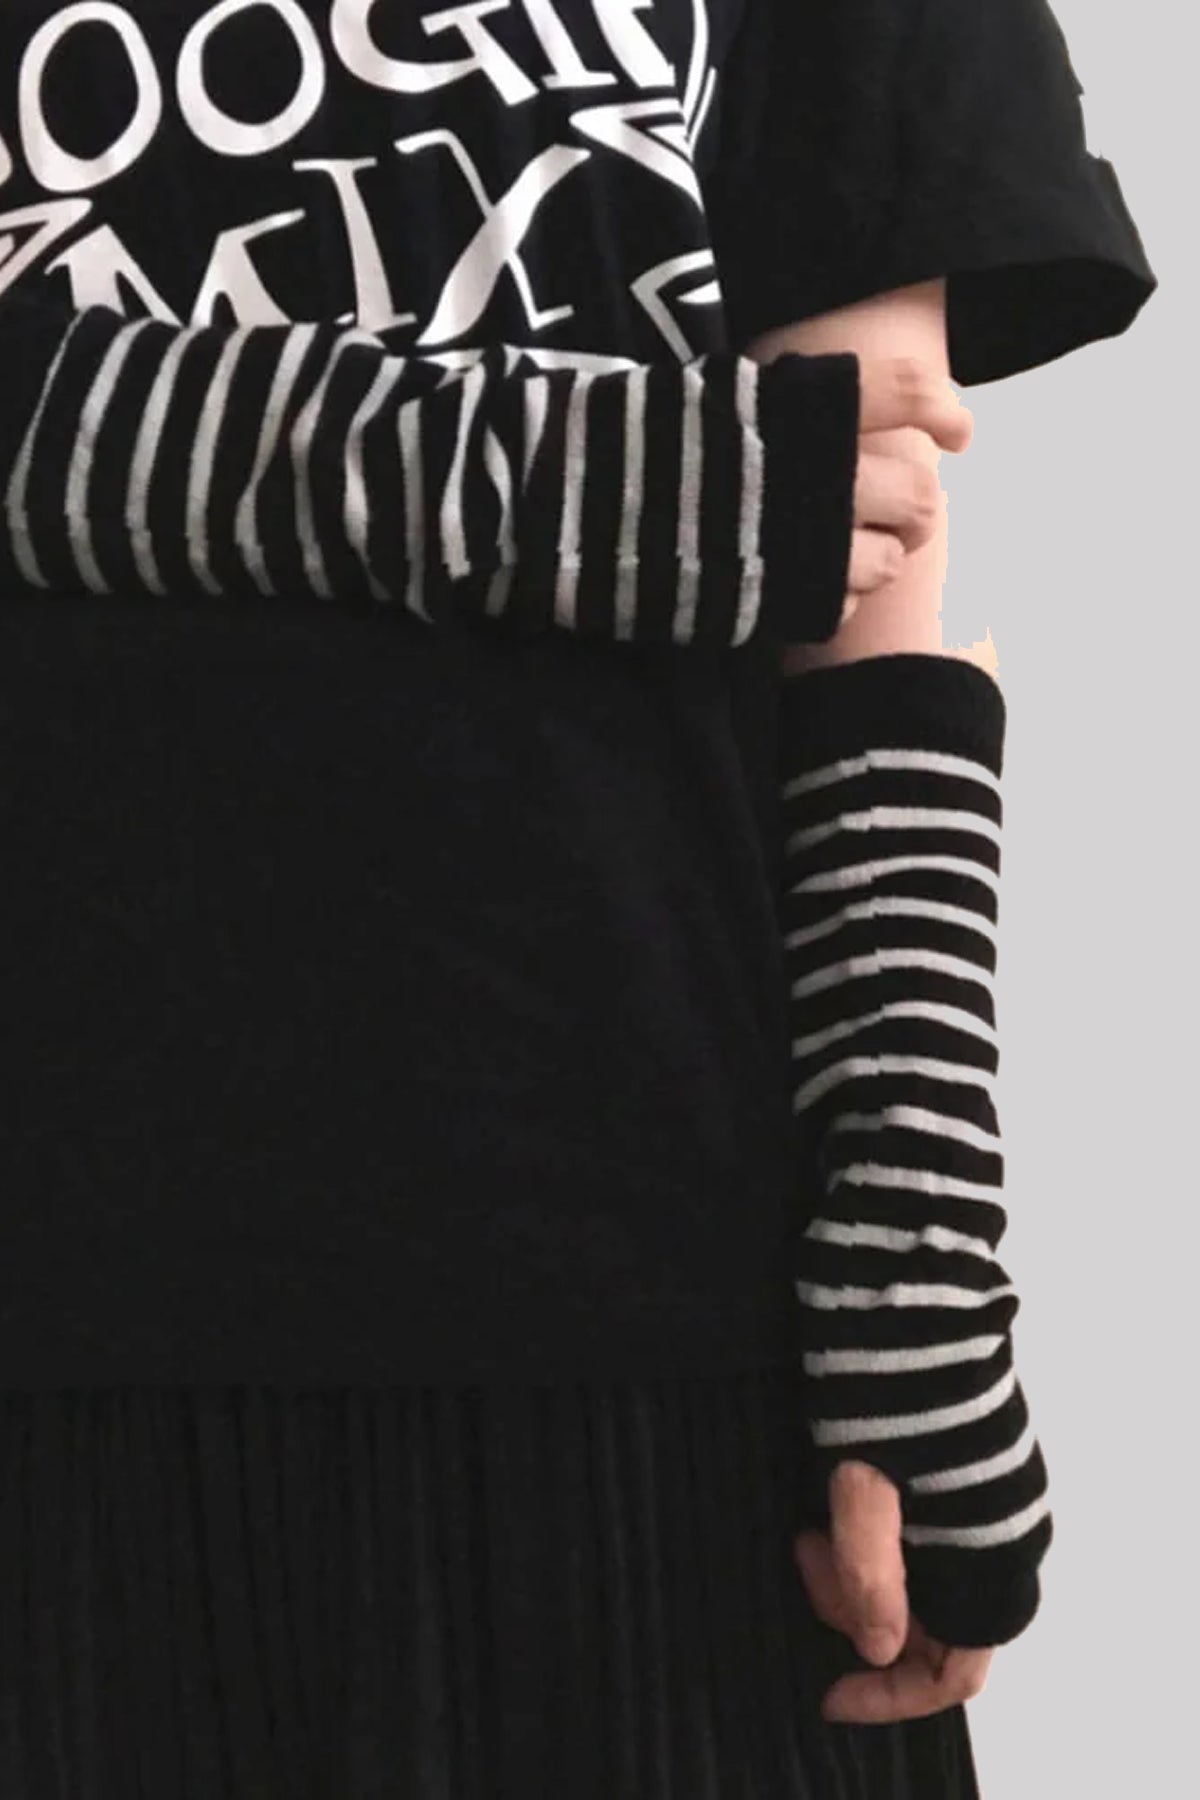 Ro Rox Gothic Striped Fingerless Armwarmers with Thumbhole, Black & Grey